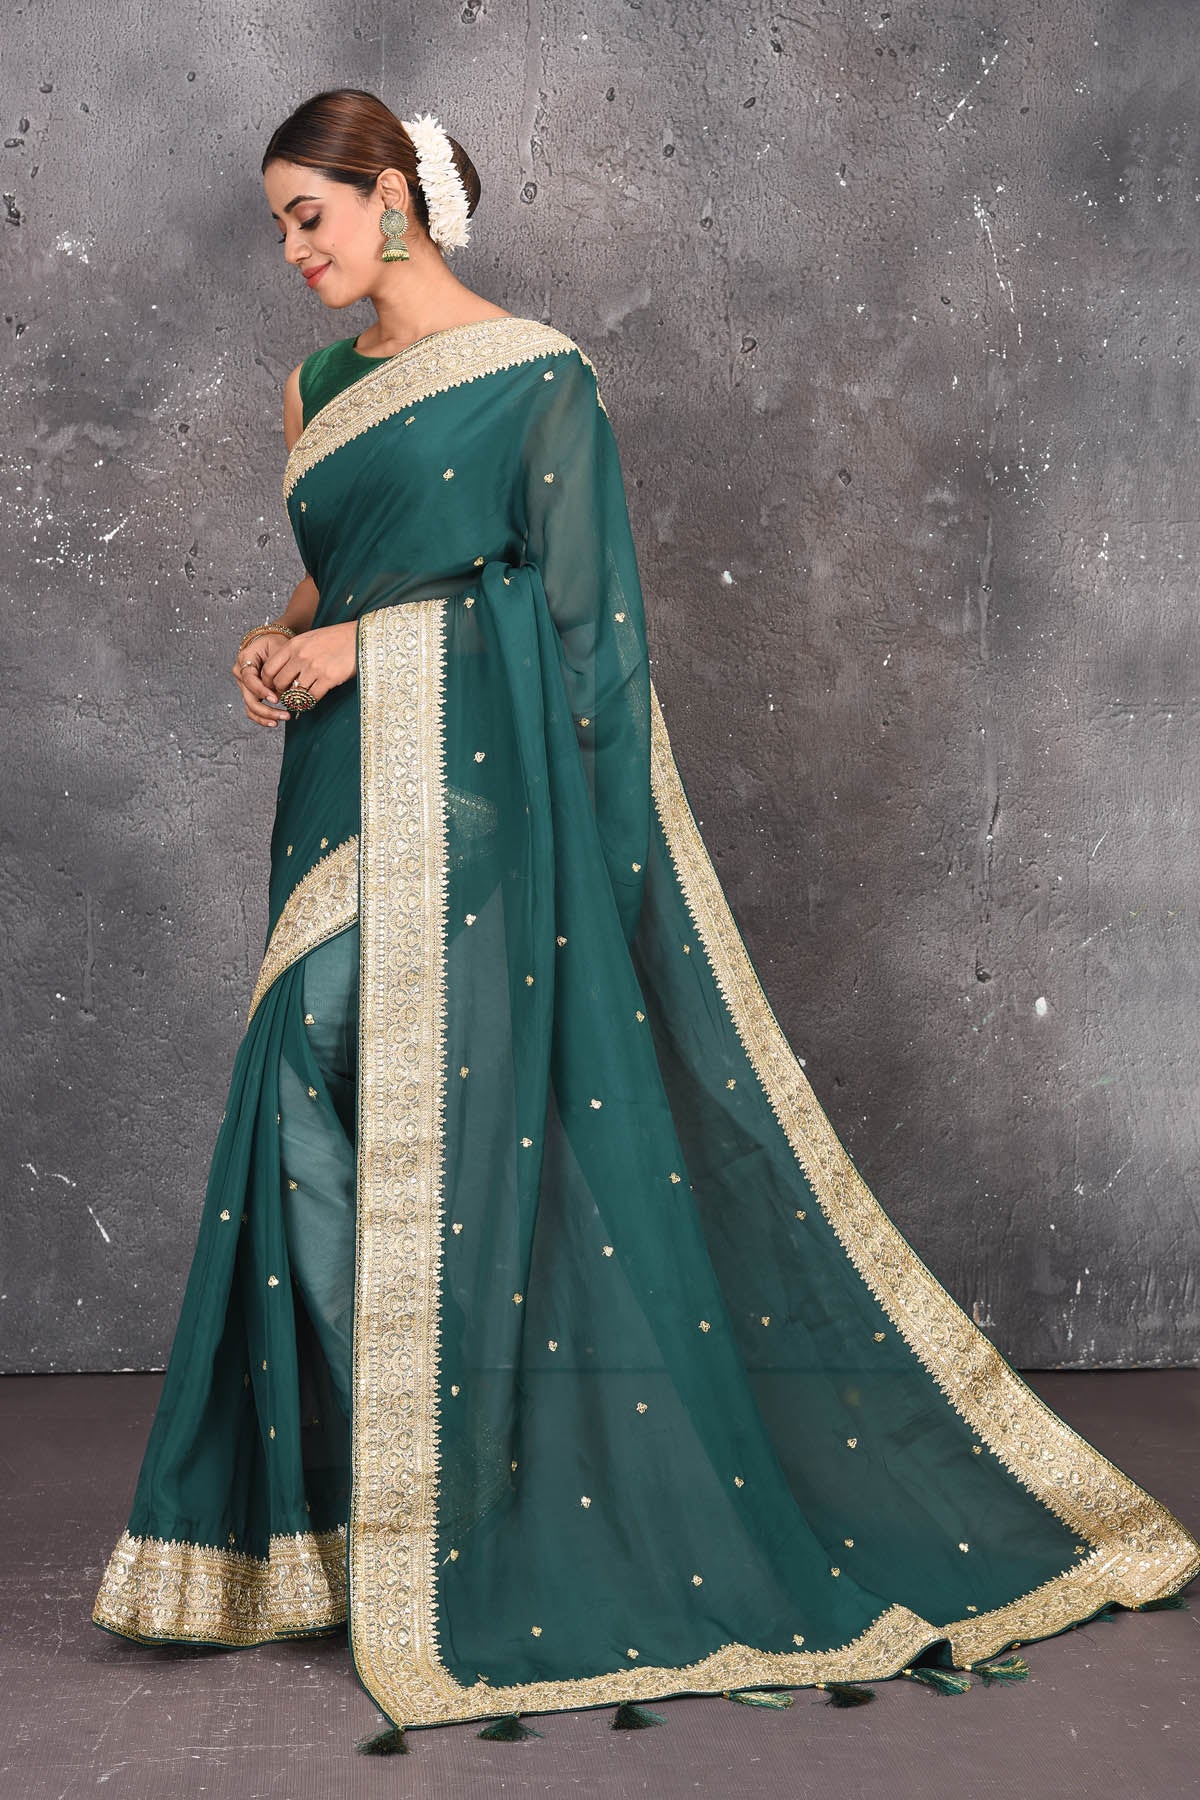 Buy exquisite pine green georgette banarasi designer saree with golden heavy Border online in USA which has crafted by skilled weaver of Banaras with elegance and grace, this saree is definitely the epitome of beauty and a must have in your collection. Buy designer handwoven banarasi georgette sari with any blouse from Pure Elegance Indian saree store in USA.-Side with open pallu.